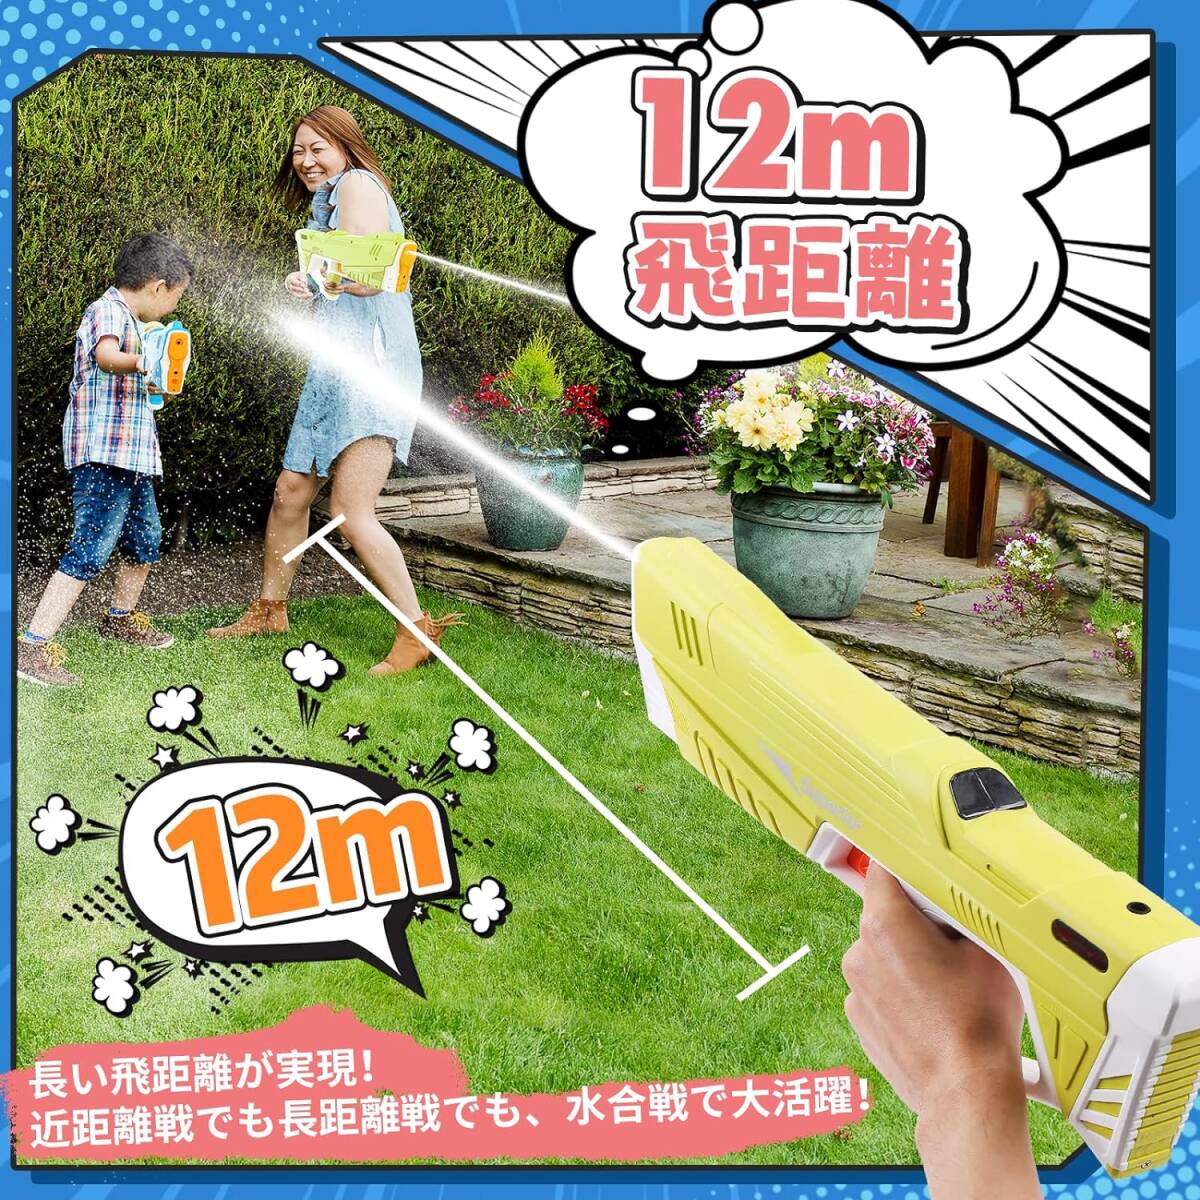  electromotive water gun yellow color electromotive water pistol super powerful . distance electric . water waterproof battery Pooh ruby chi sea water . summer festival camp place family child 